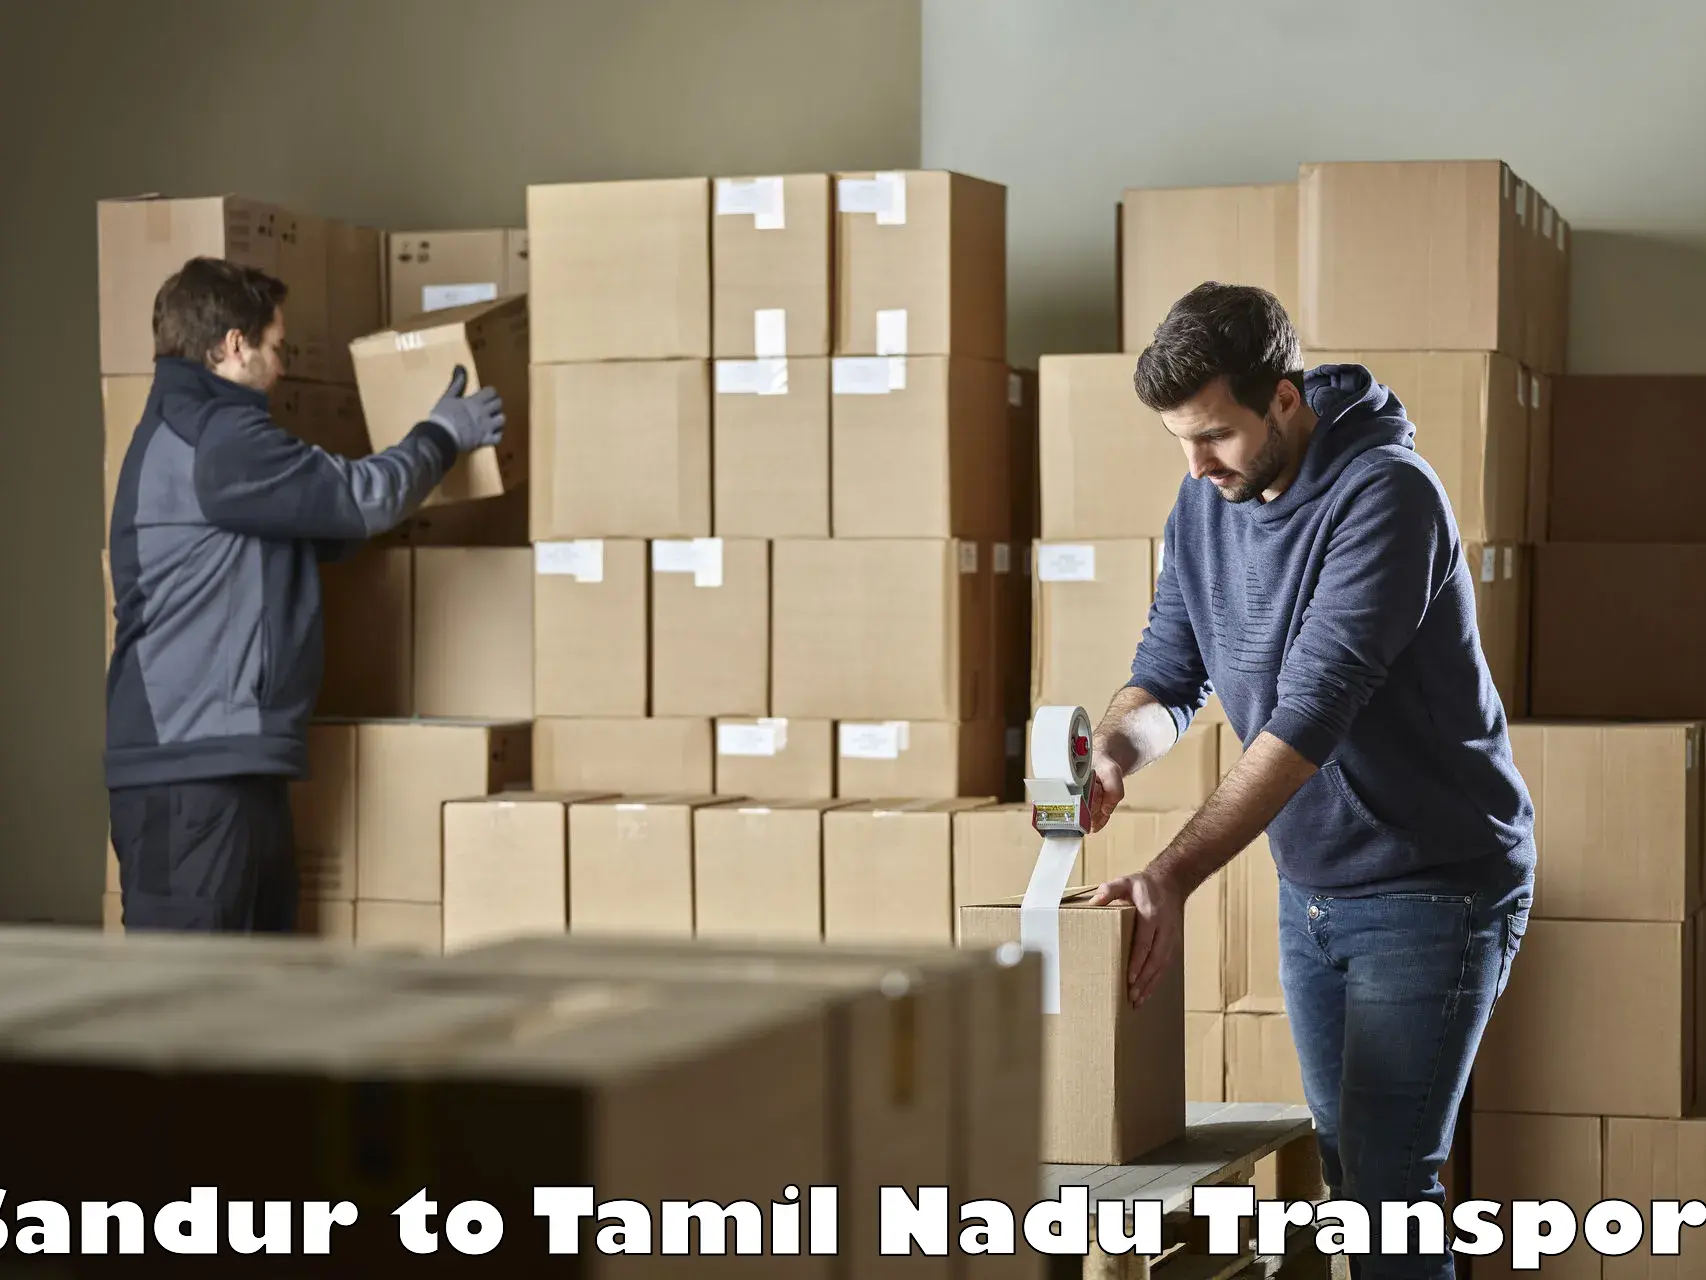 Daily parcel service transport Sandur to Vellore Institute of Technology